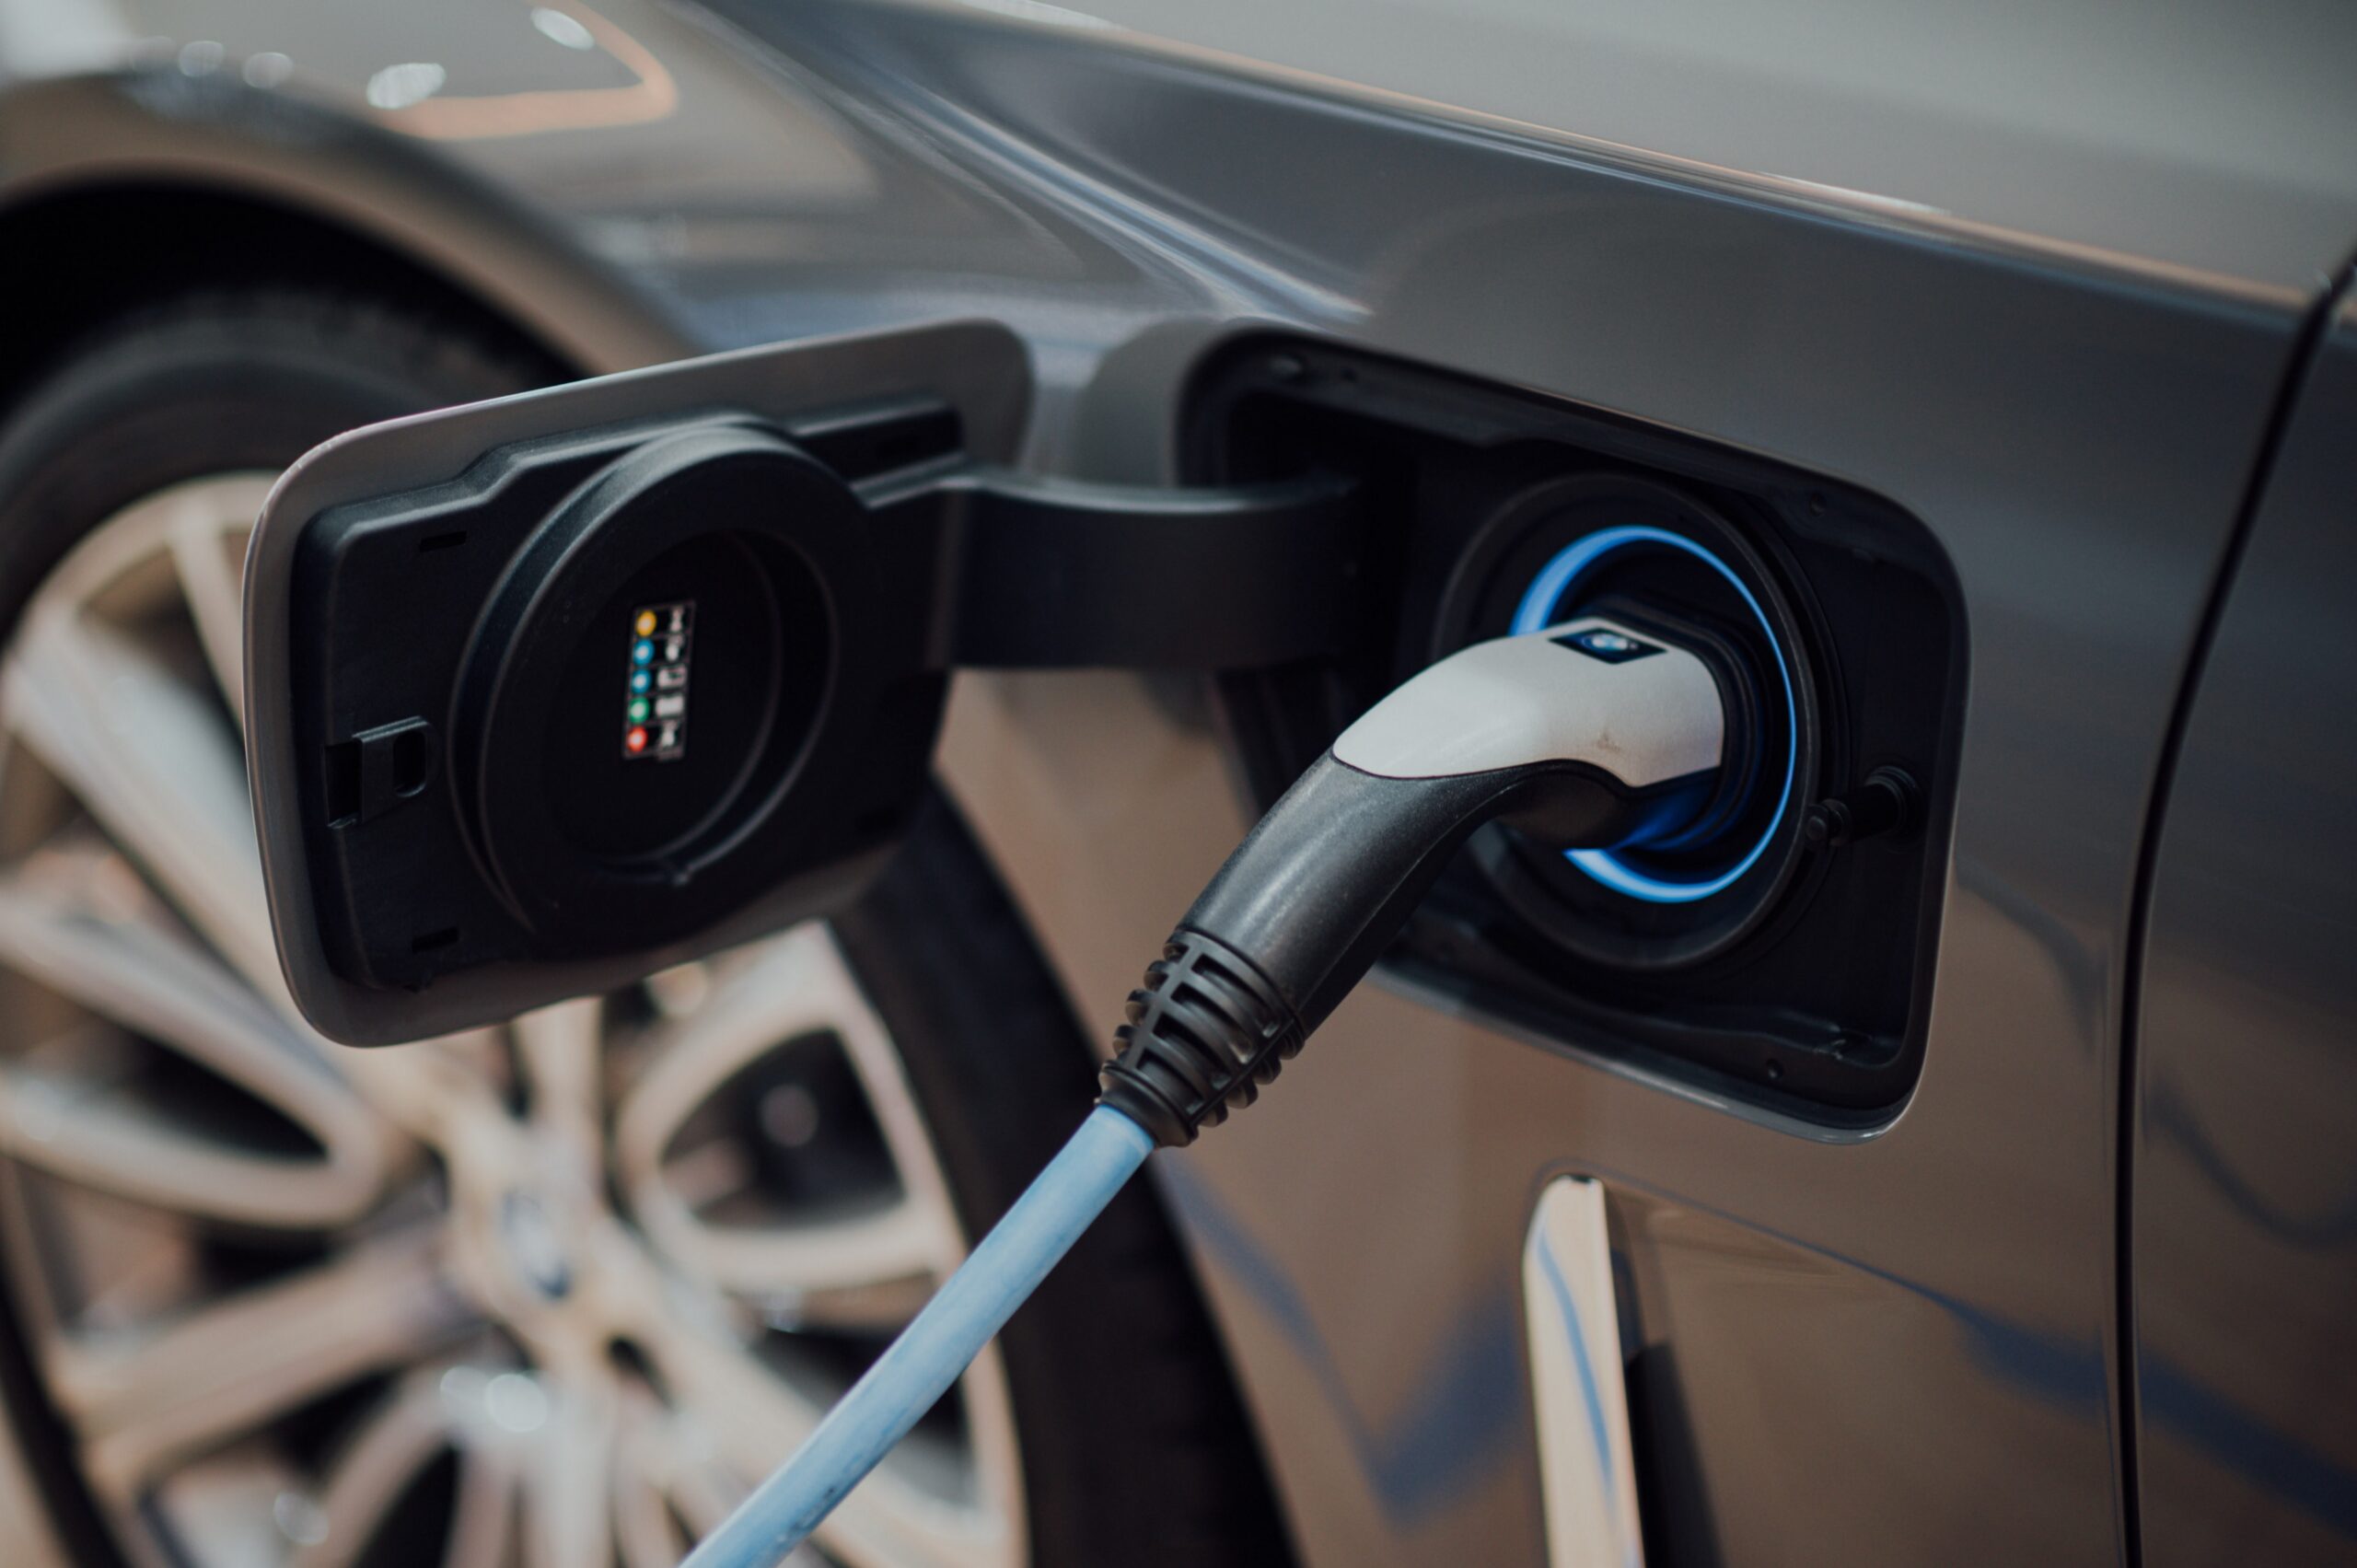 What innovations will drive the electric car trend in the future?